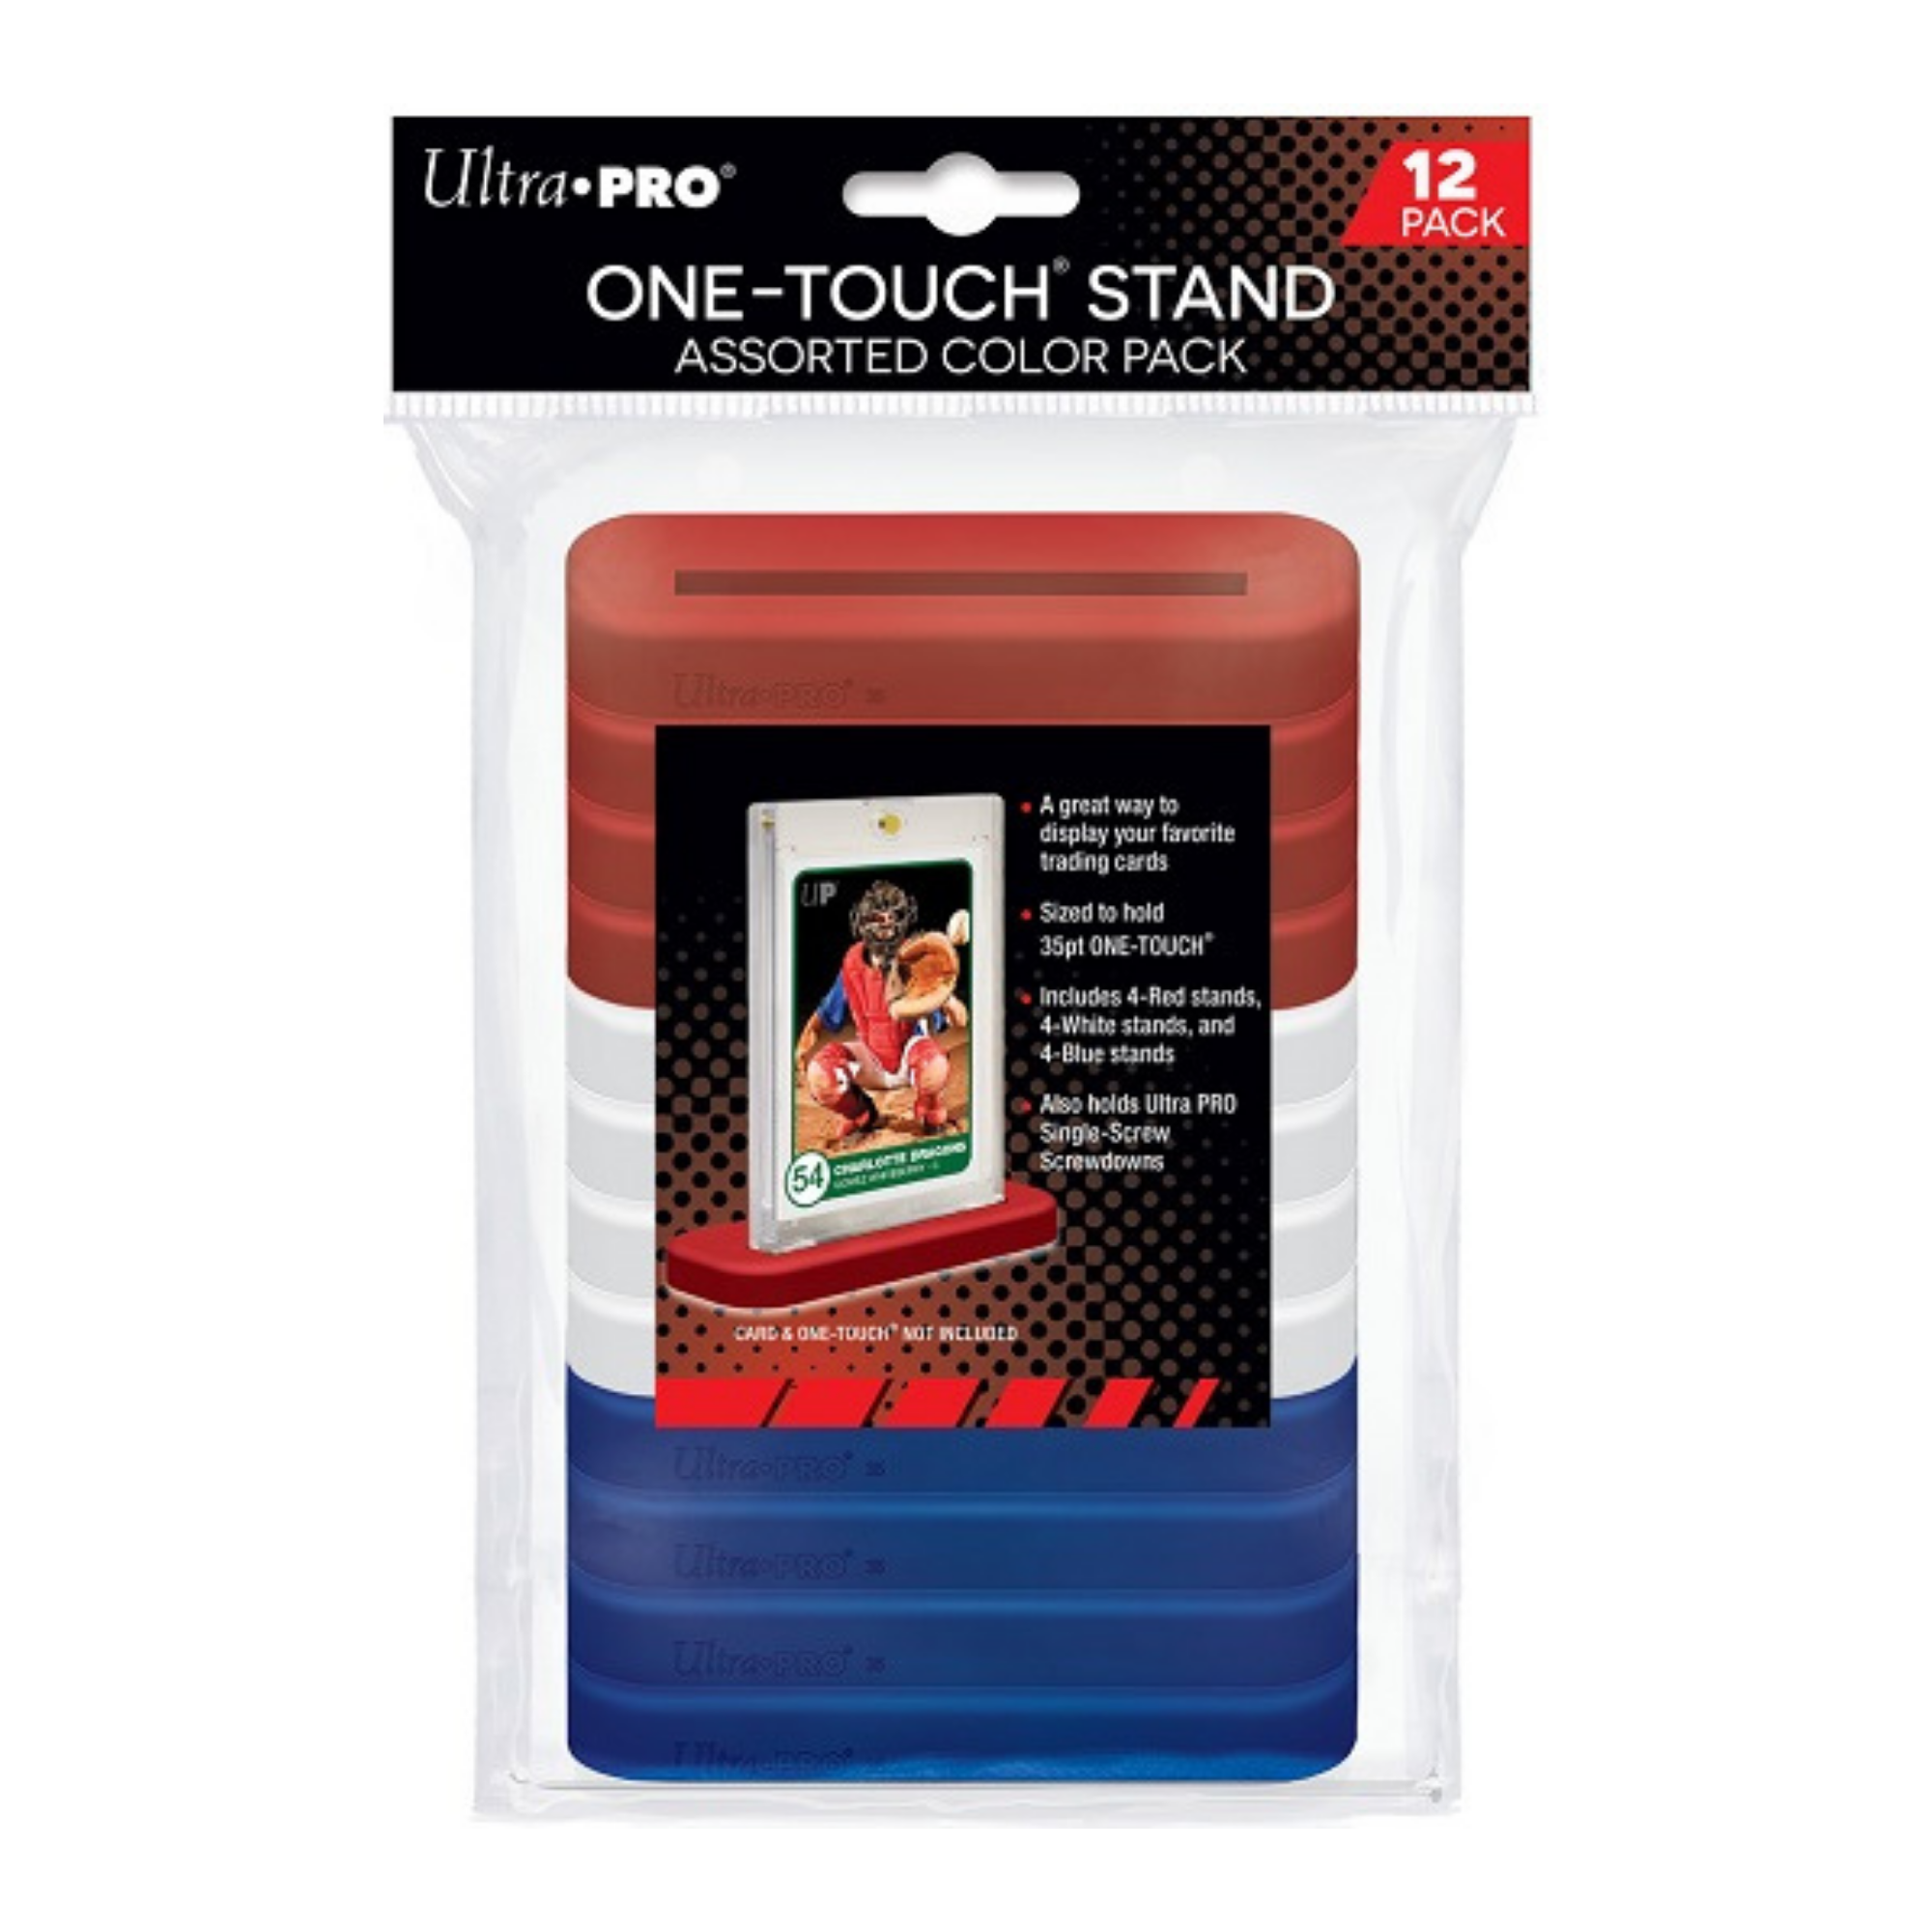 Ultra Pro 35-Point ONE-Touch Magnetic Trading Card Holder (Pack of 5)